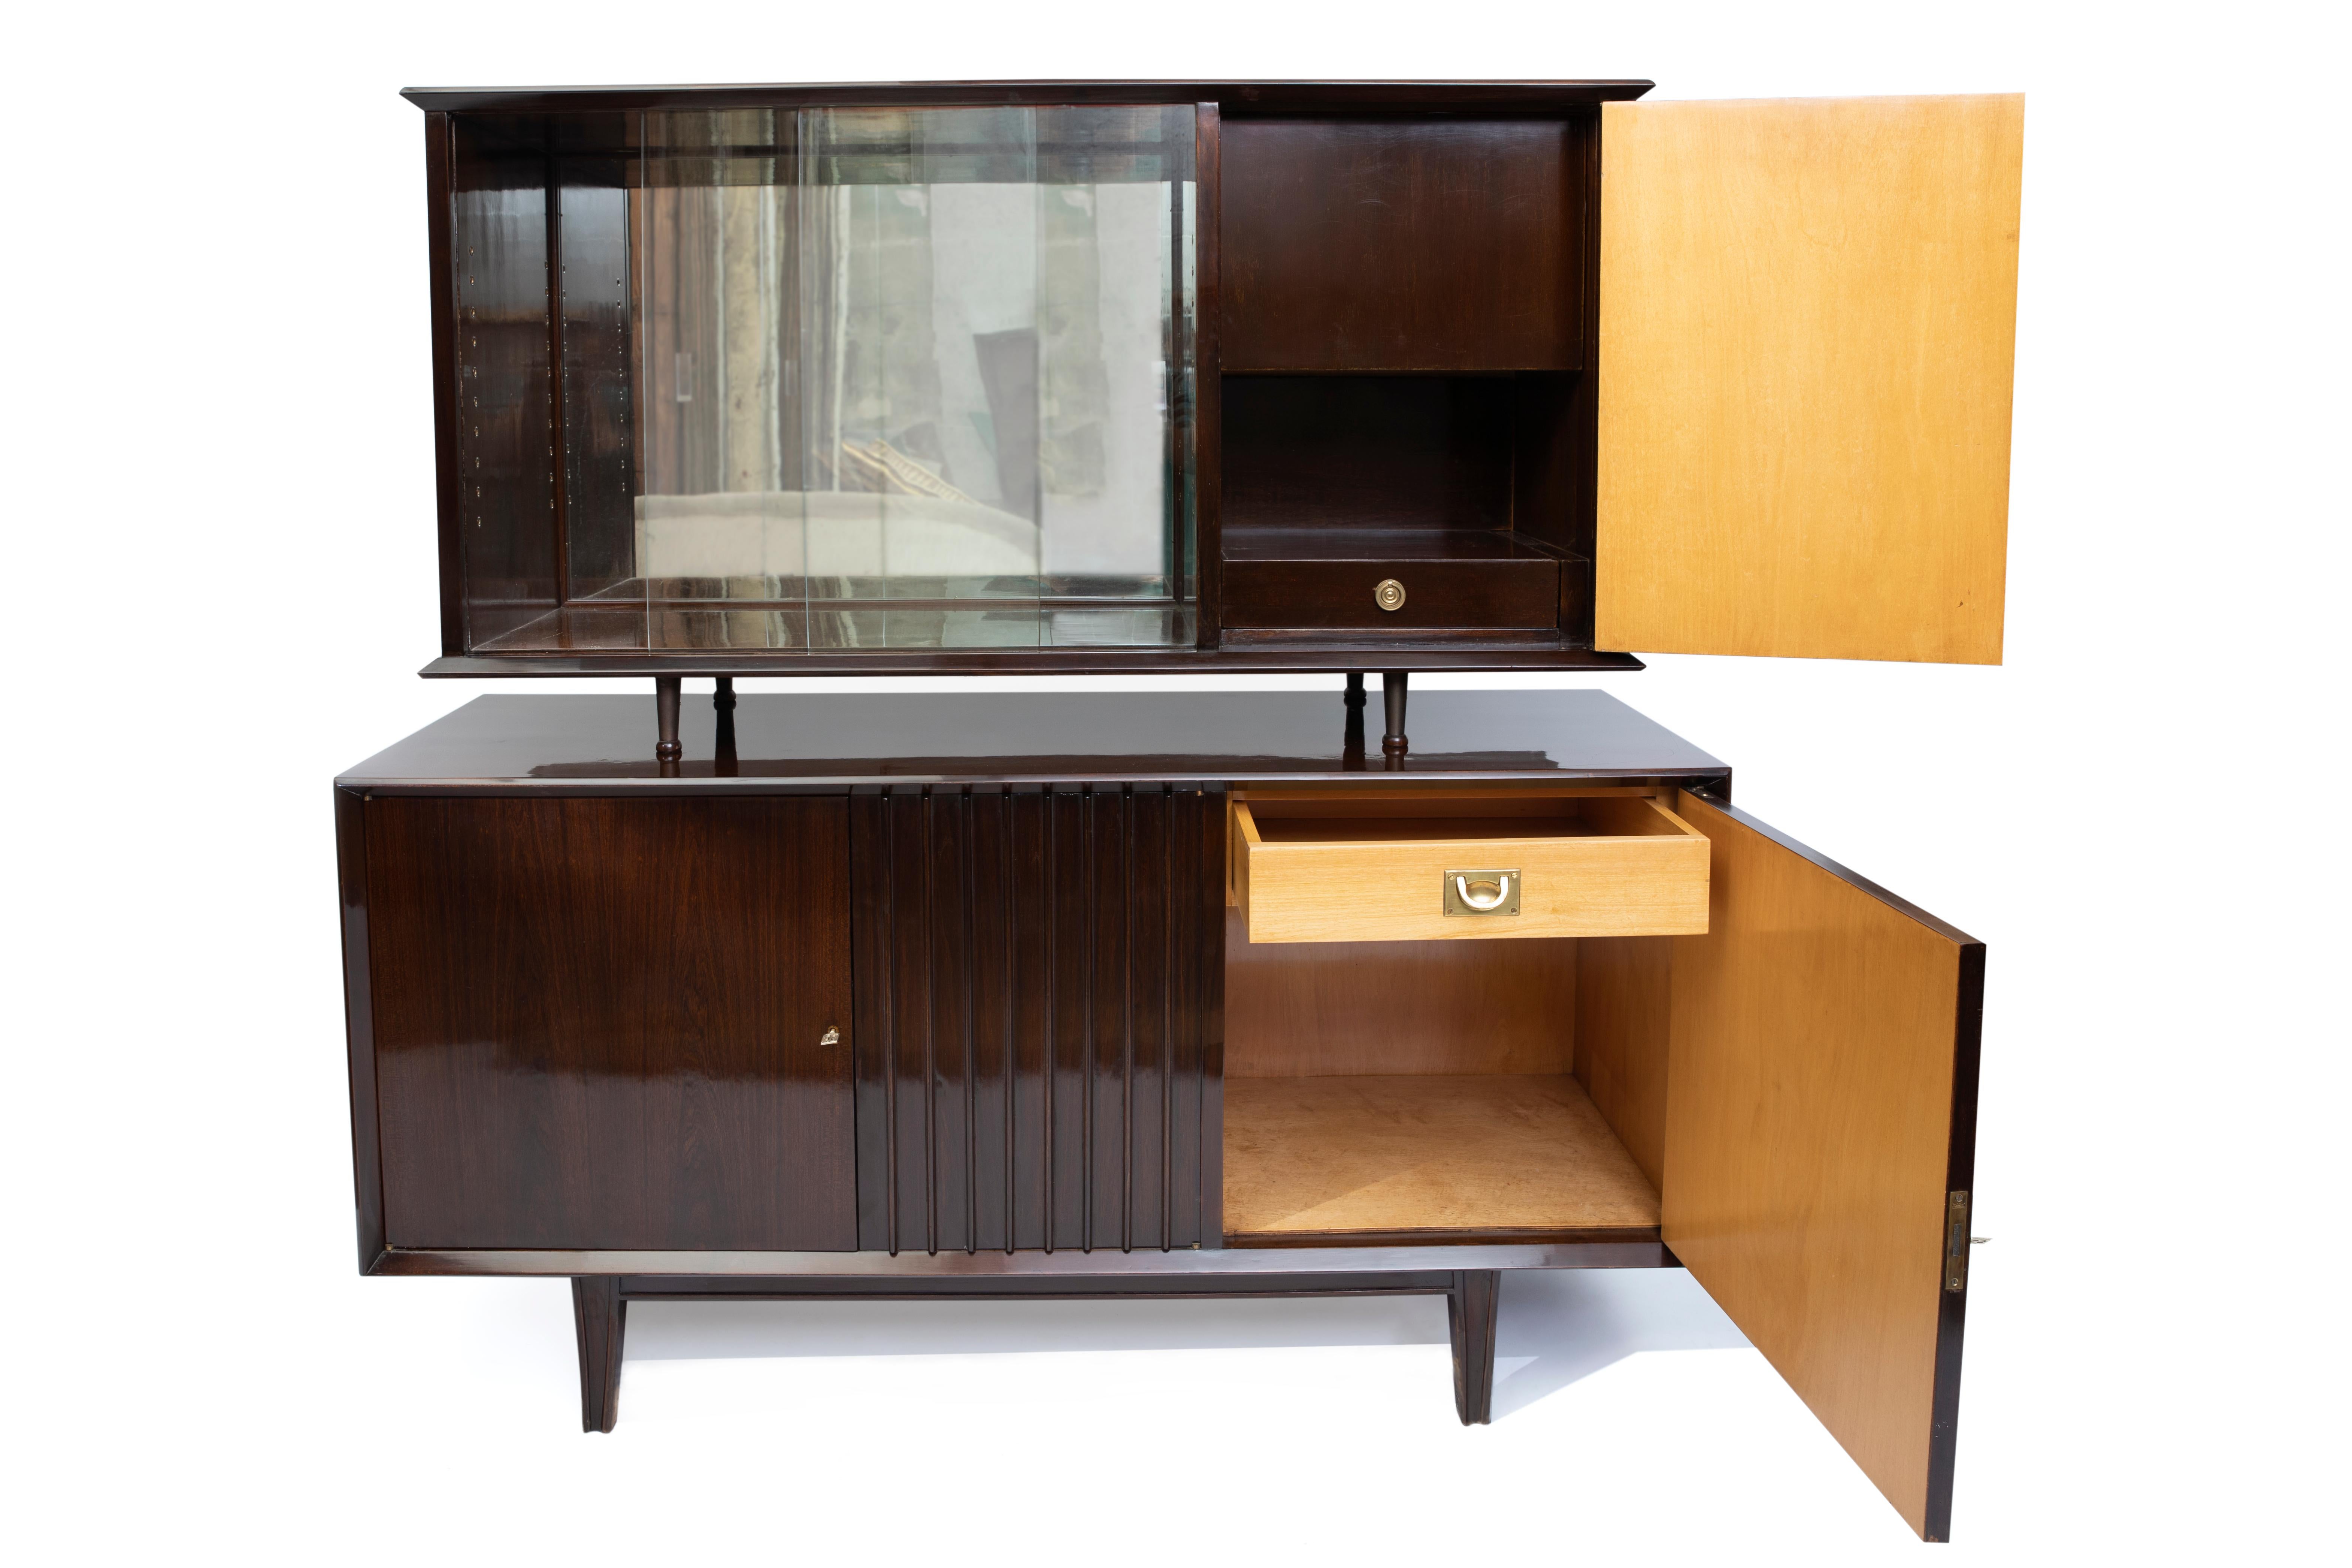 Wood, glass, mirror and bronze cabinet and vitrine by Englander & Bonta, Argentina, circa 1950.
It comes with glass shelves for the vitrine side.
  